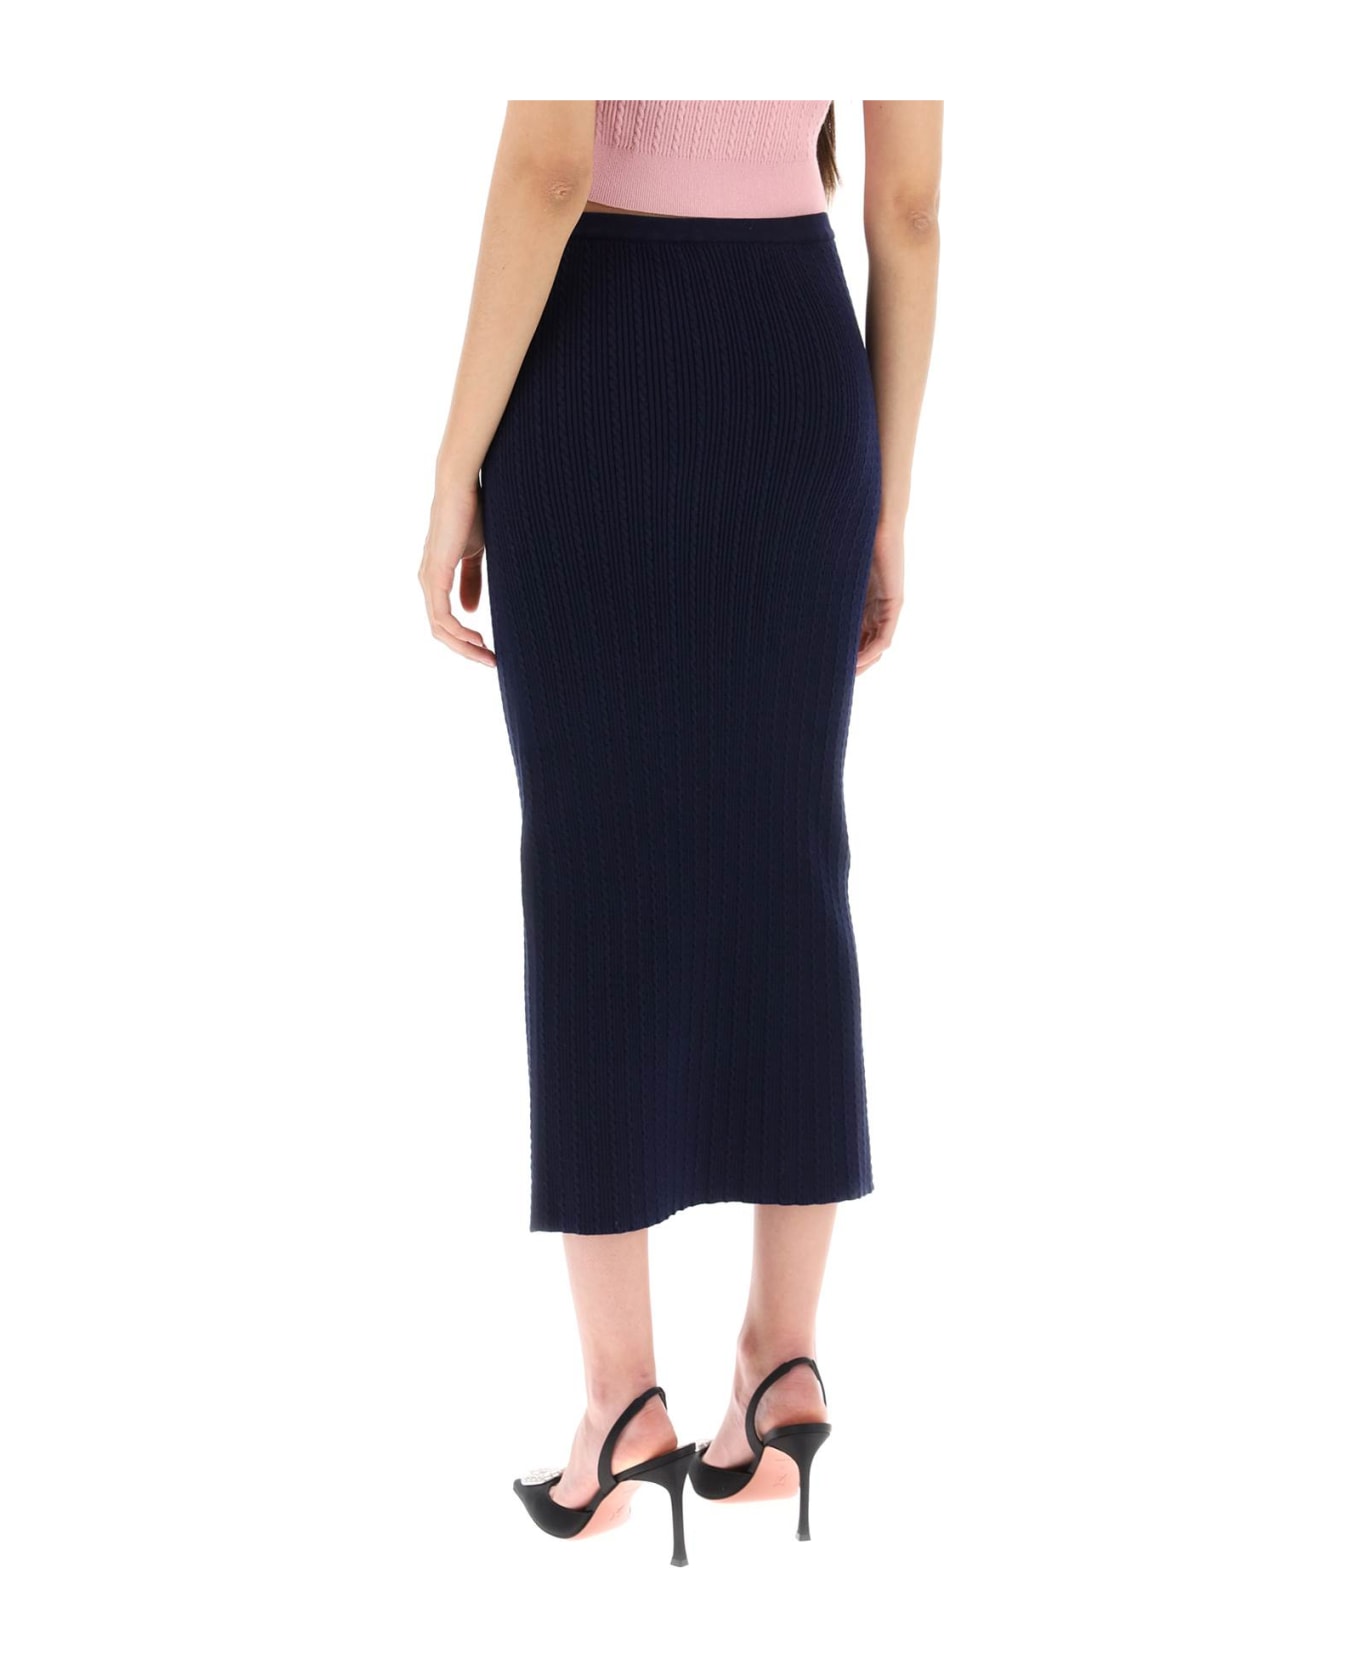 Alessandra Rich Knitted Pencil Skirt - NAVY BLUW (Blue)